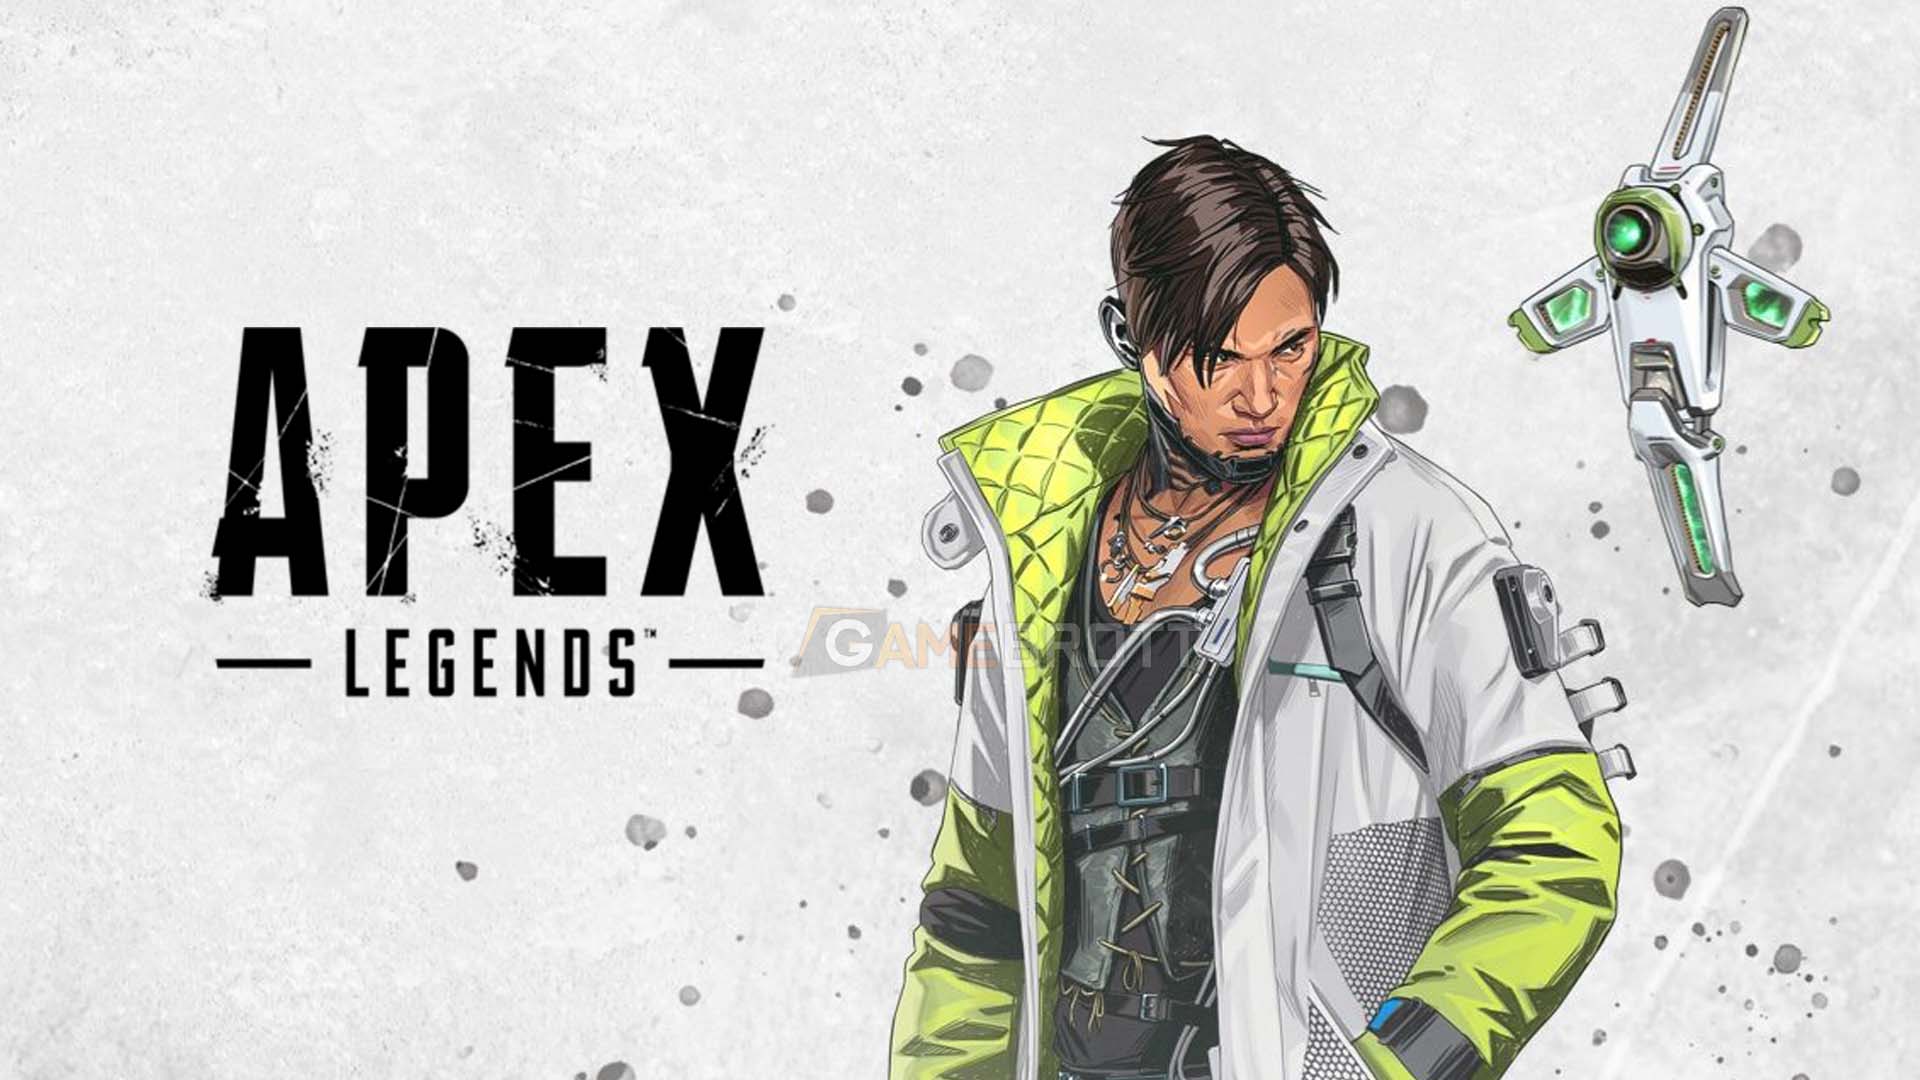 Apex Legends Mobile Season 2: Distortion Launches July 12, Brings New Map  and Legend